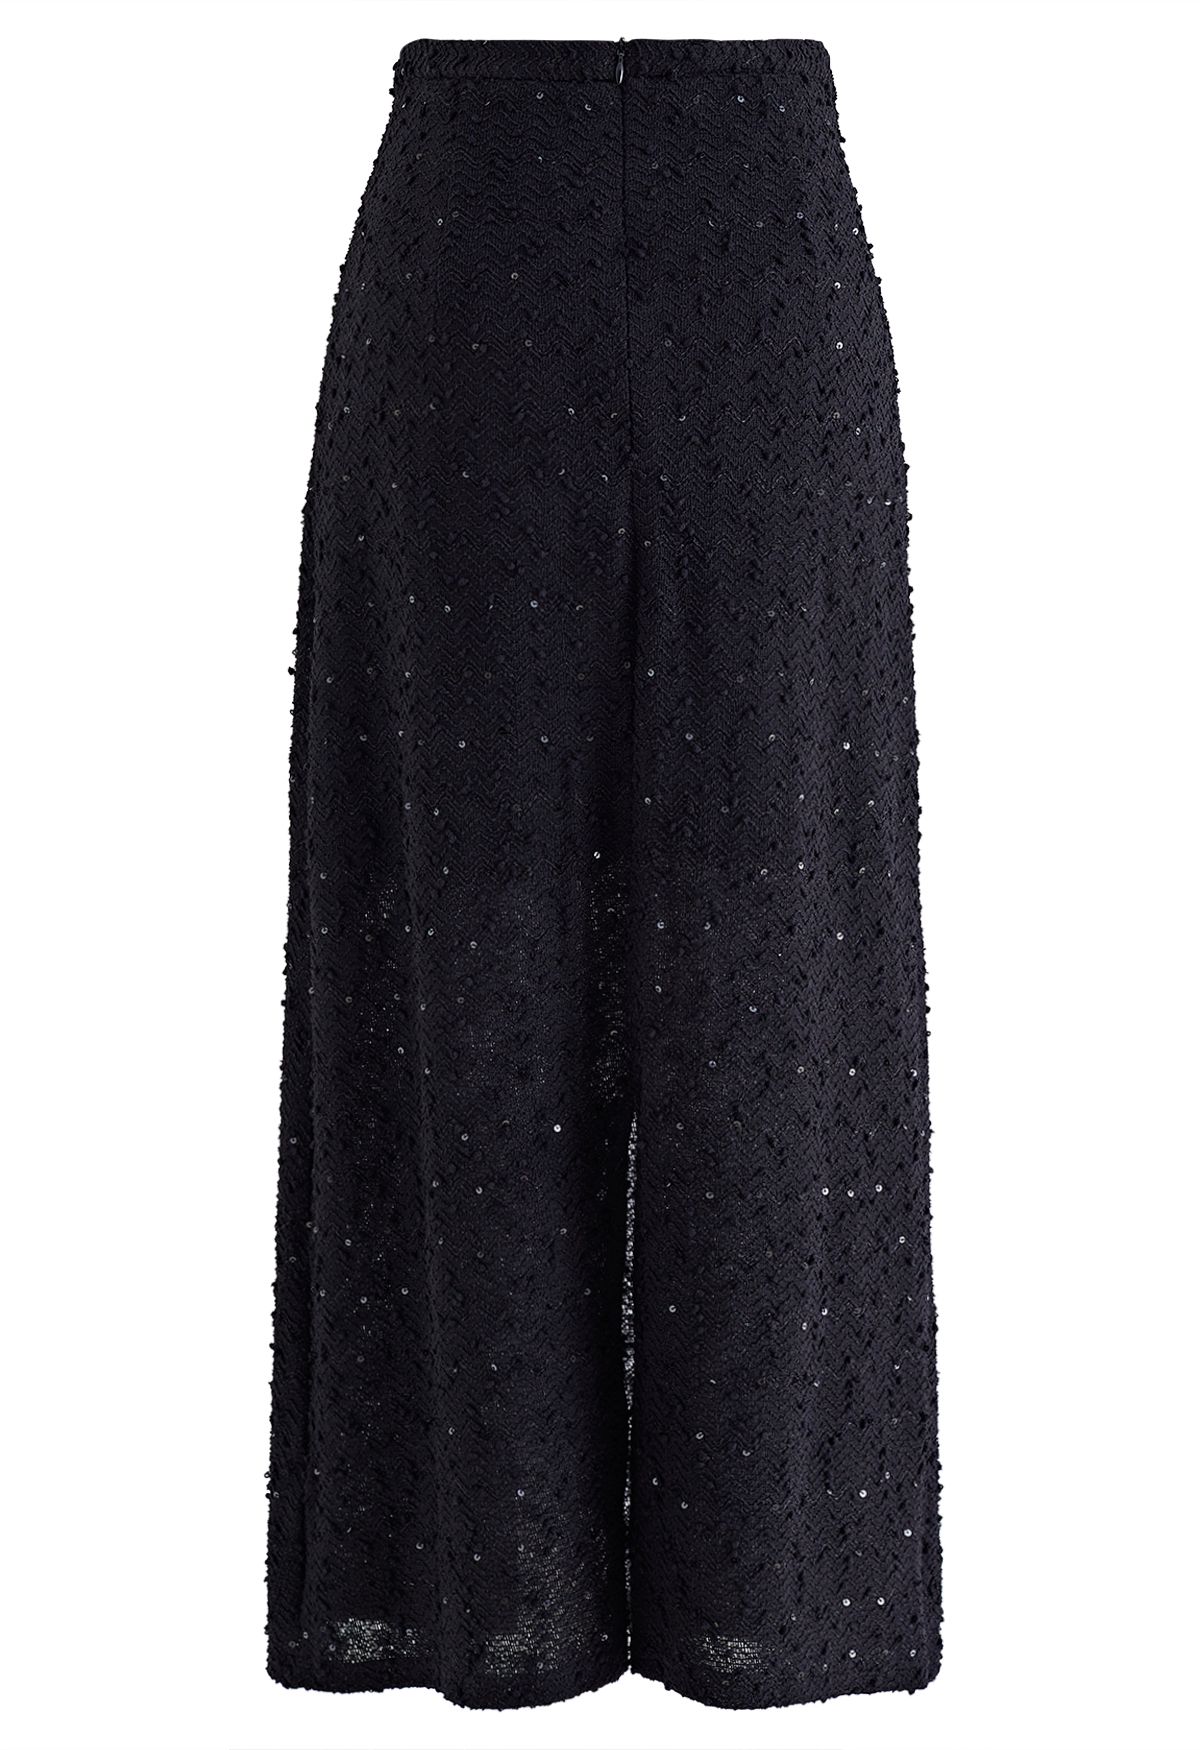 Dotted Wavy Texture Pencil Maxi Skirt in Black